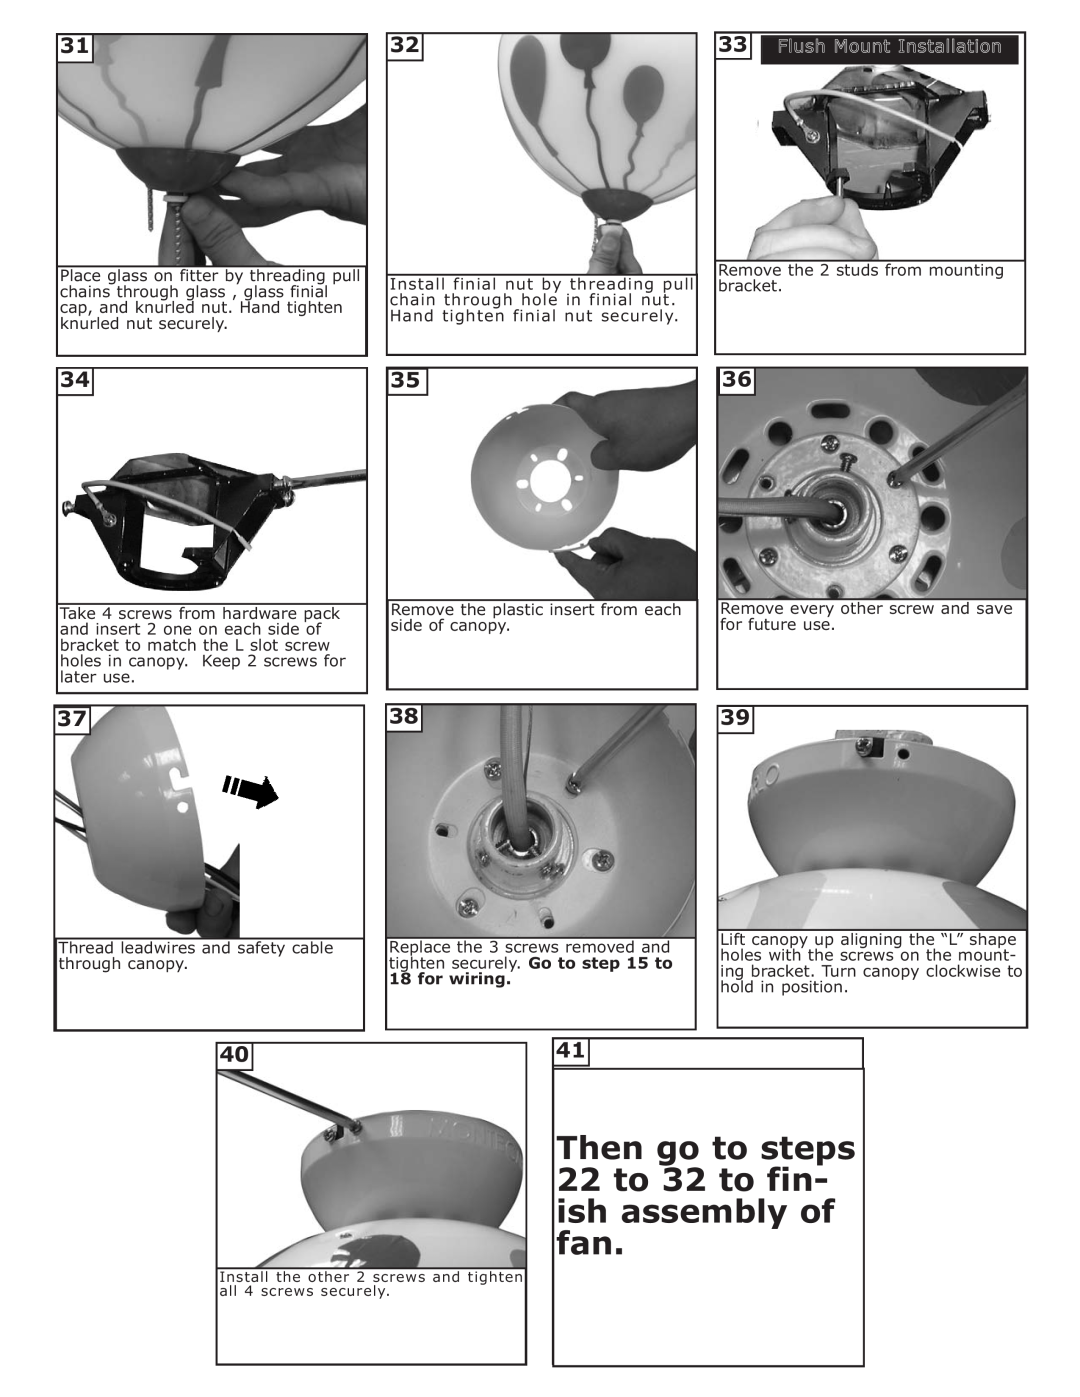 Monte Carlo Fan Company 4BN44WHD Series installation instructions 33Flush Mount Installation, for wiring 